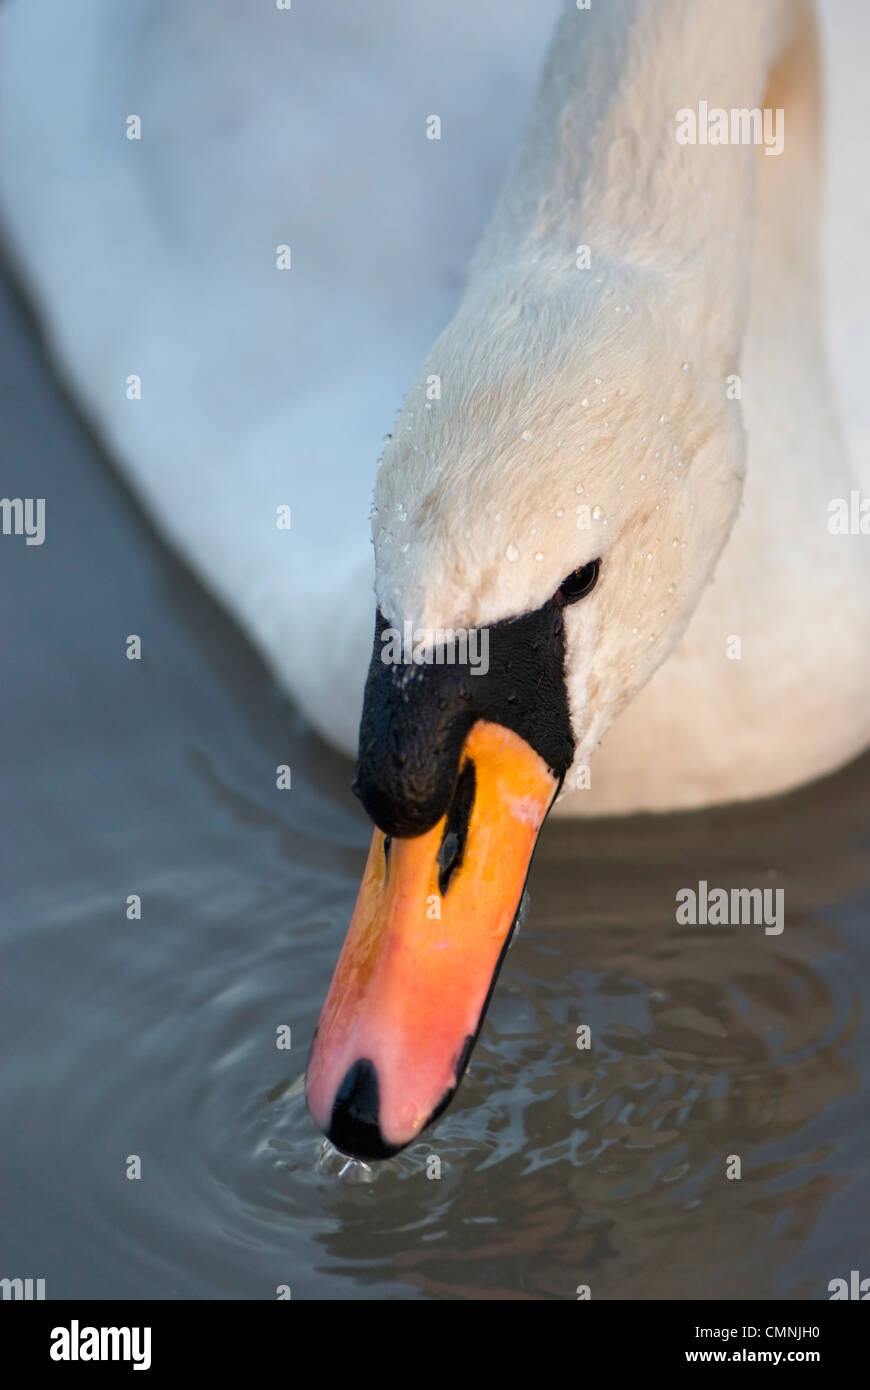 Close up of Mute swan feeding or drinking in water with water droplets on neck Stock Photo